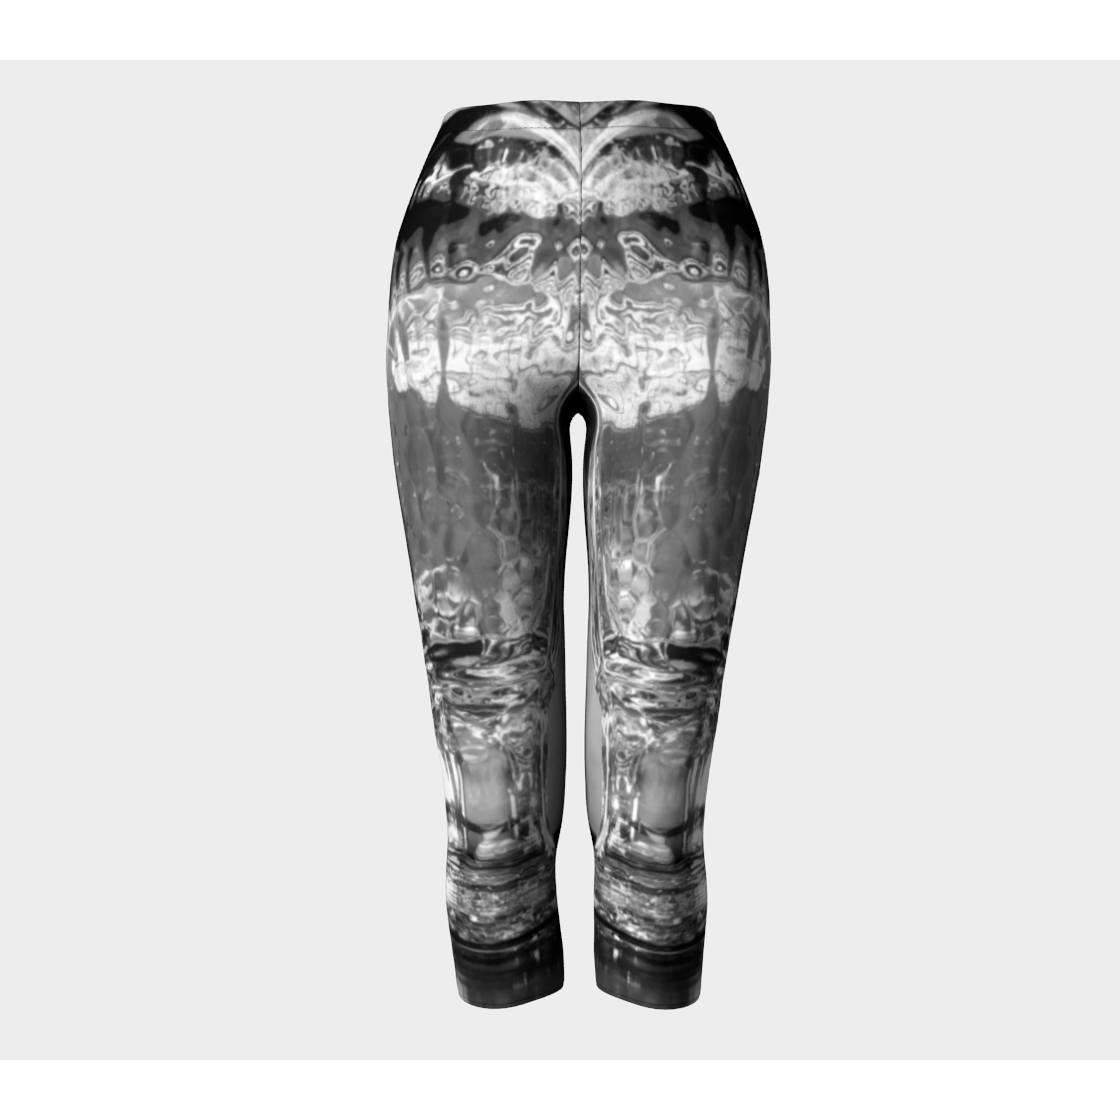 Capris for Women: Water Glass Design, Front